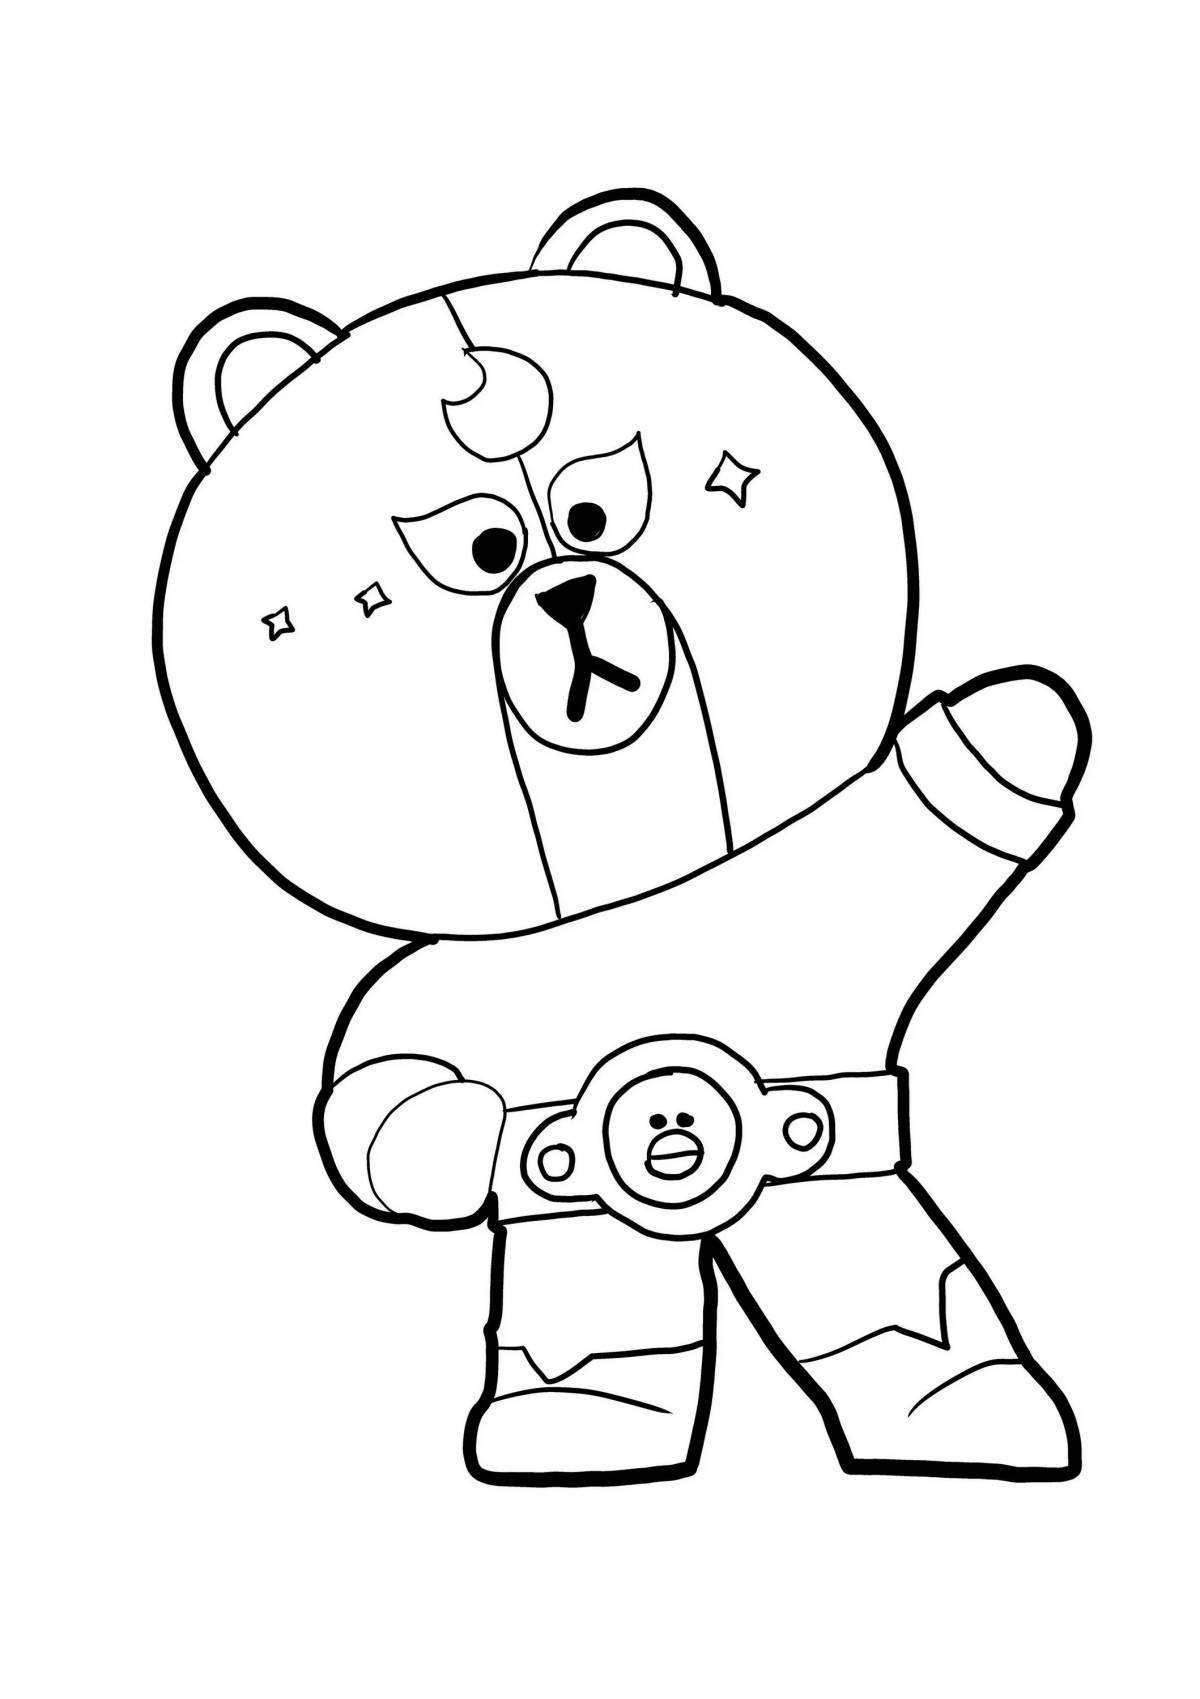 Mystical brown stars coloring page